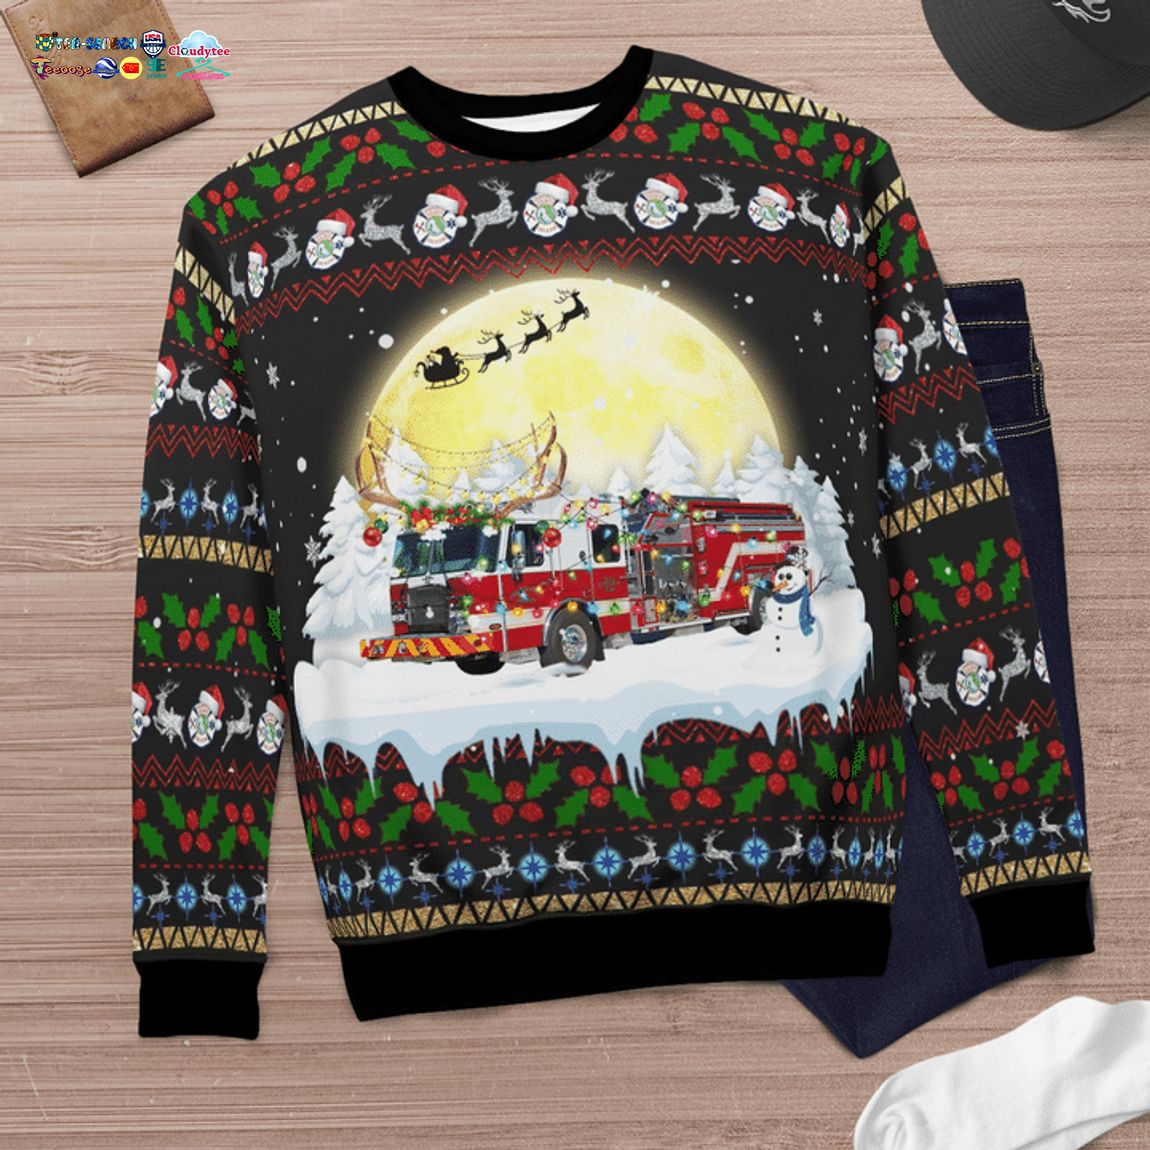 Florida Charlotte County Fire Department 3D Christmas Sweater